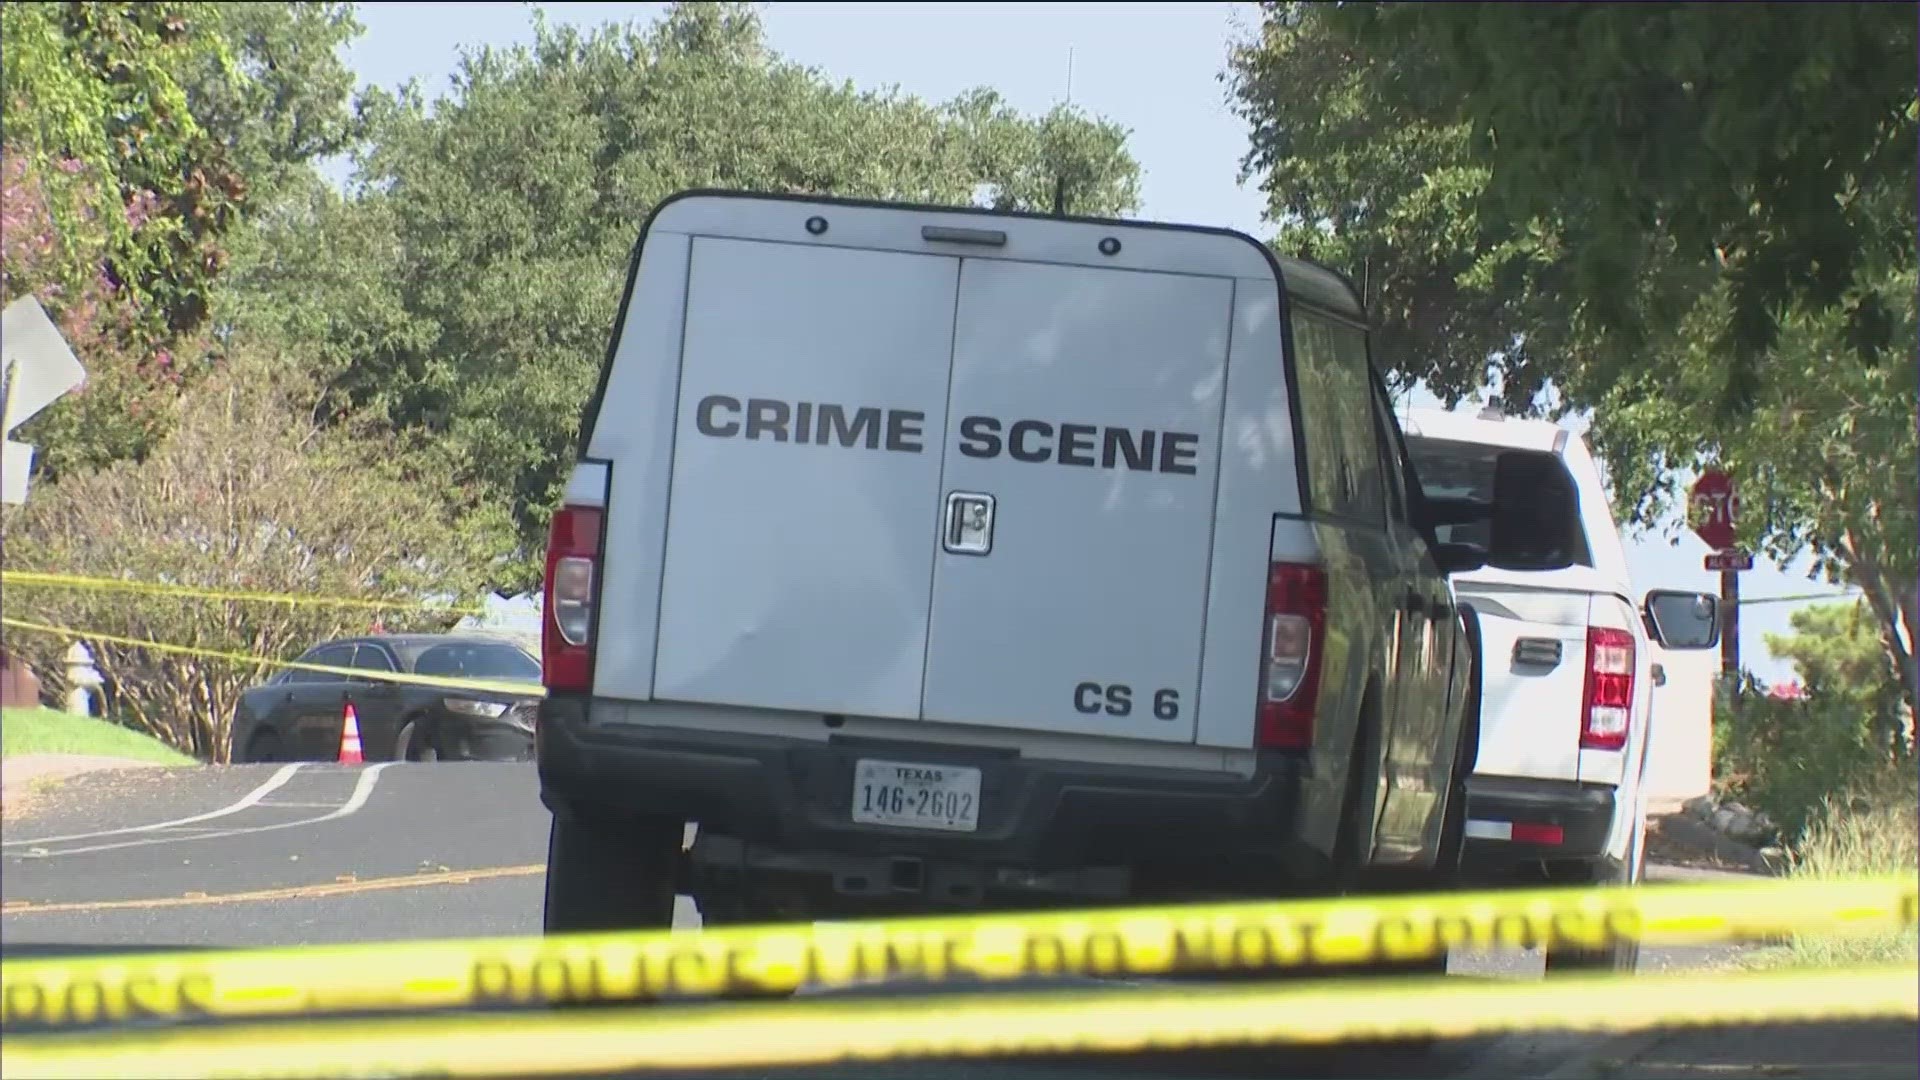 The Austin Police Department said it is investigating the person's death as a homicide.